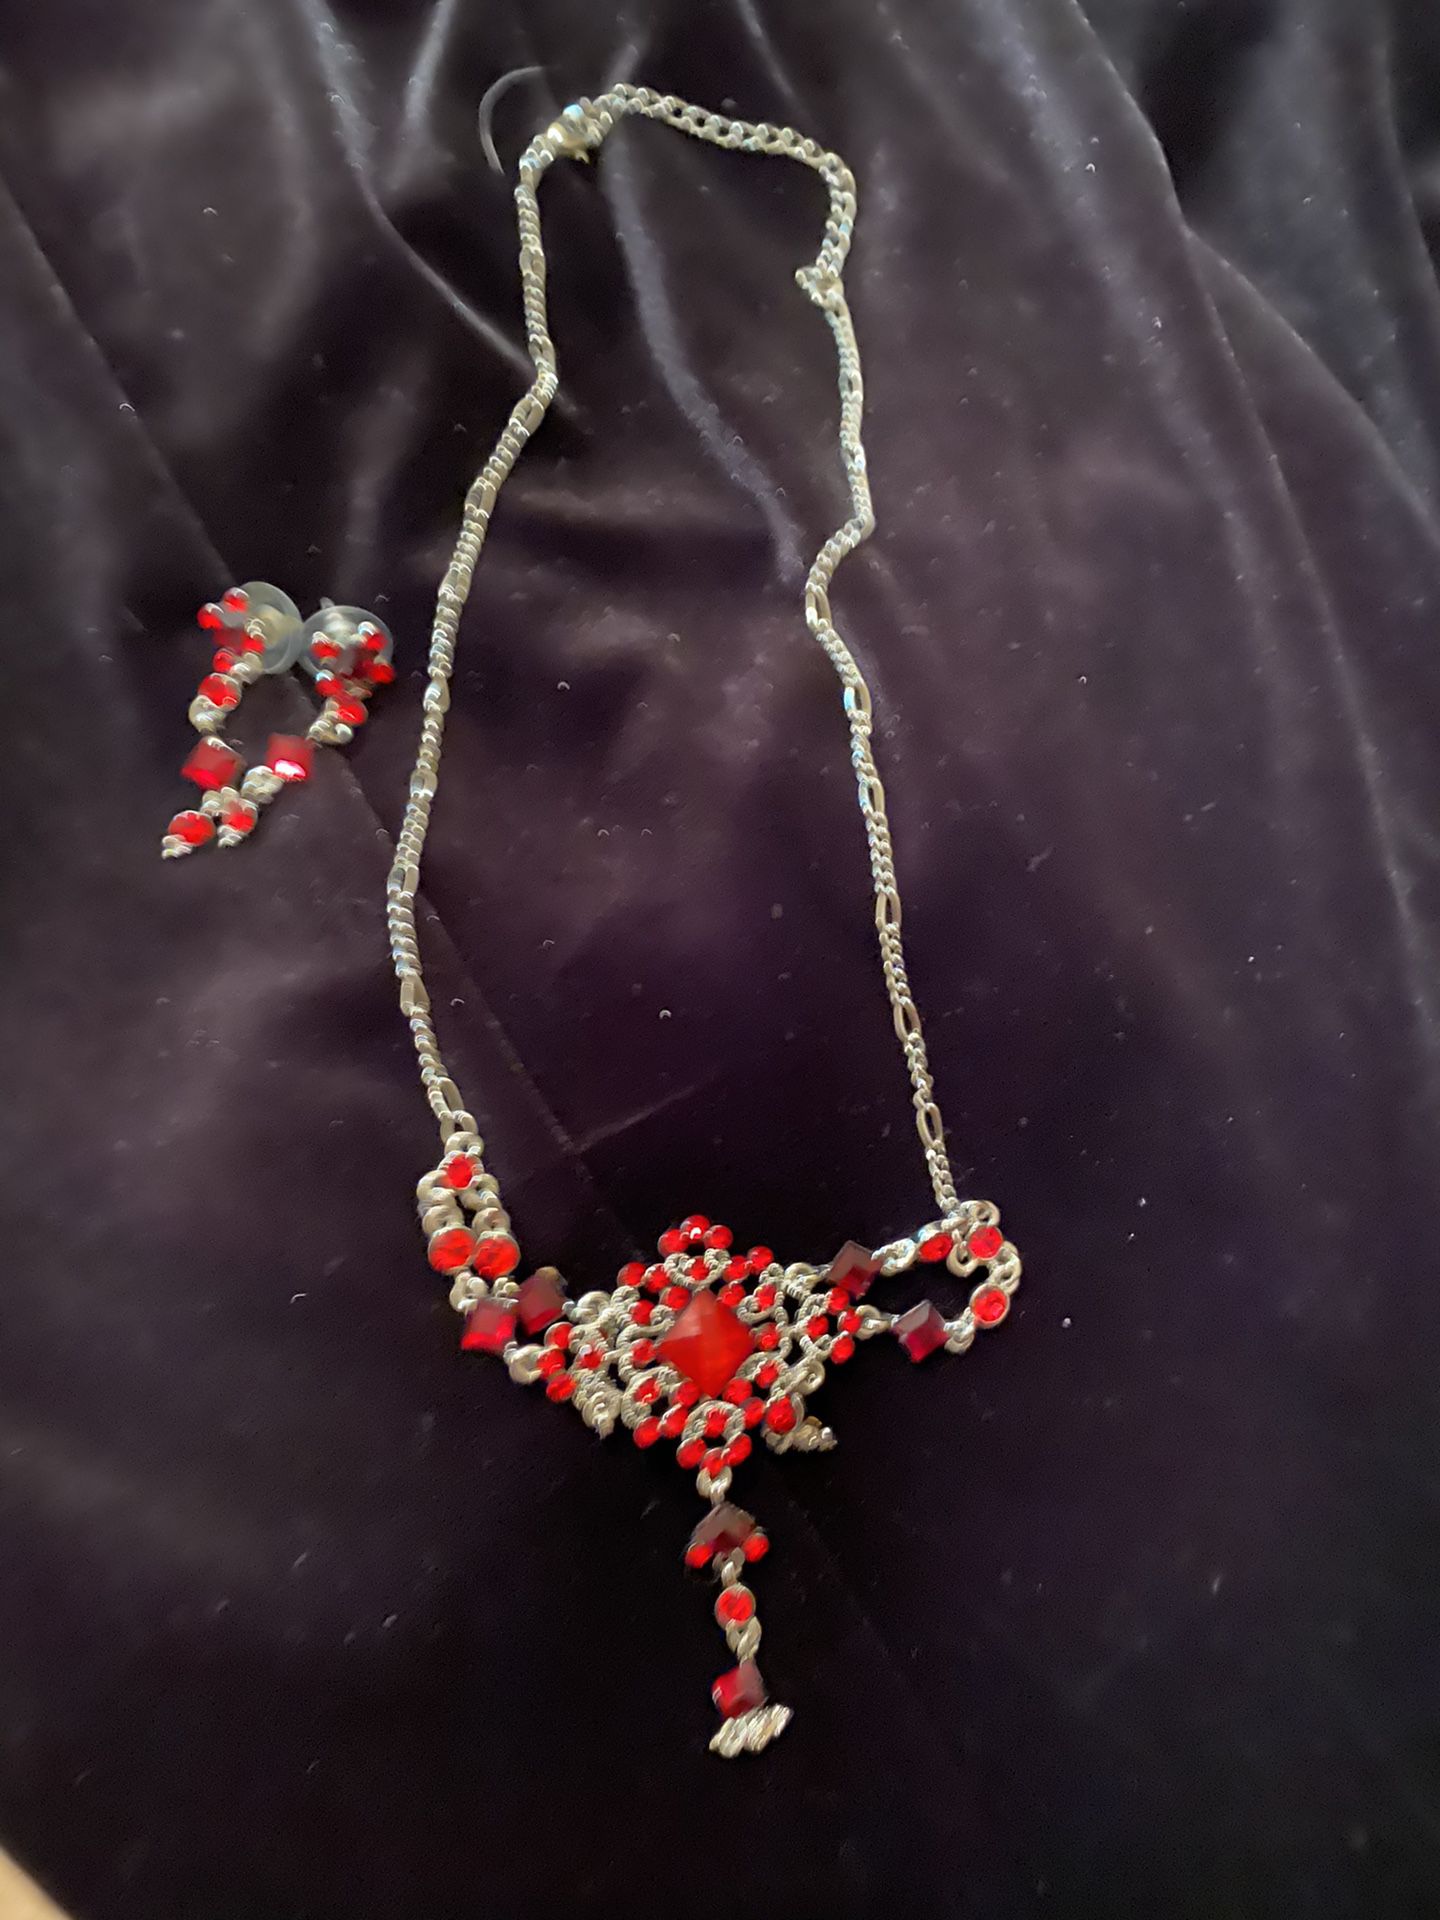 Red rhinestone/rhinestone necklace- earrings all for $25